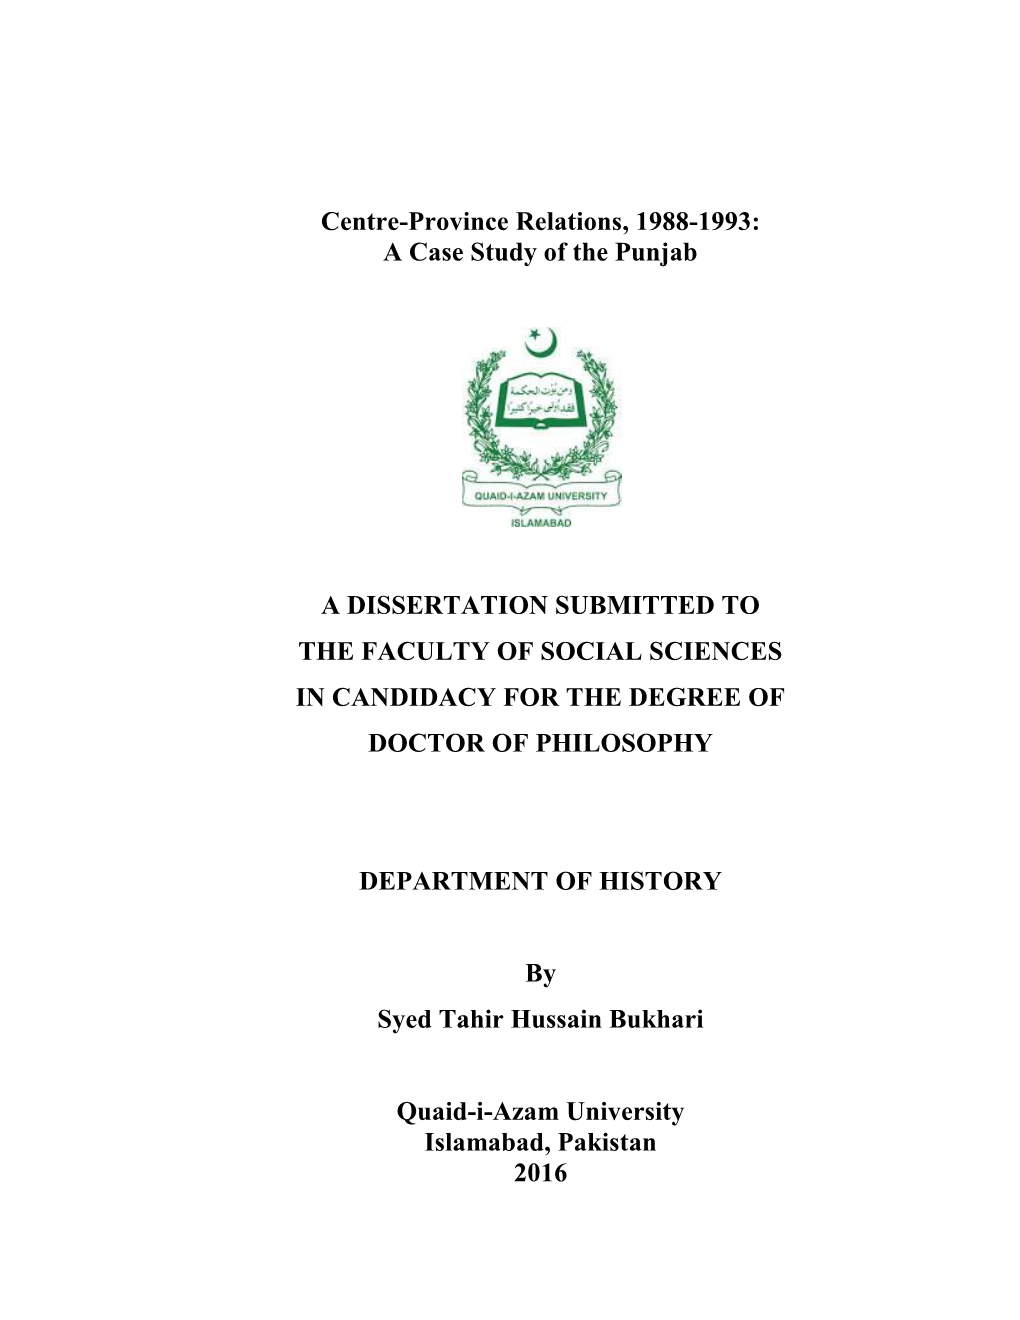 Centre-Province Relations, 1988-1993: a Case Study of the Punjab